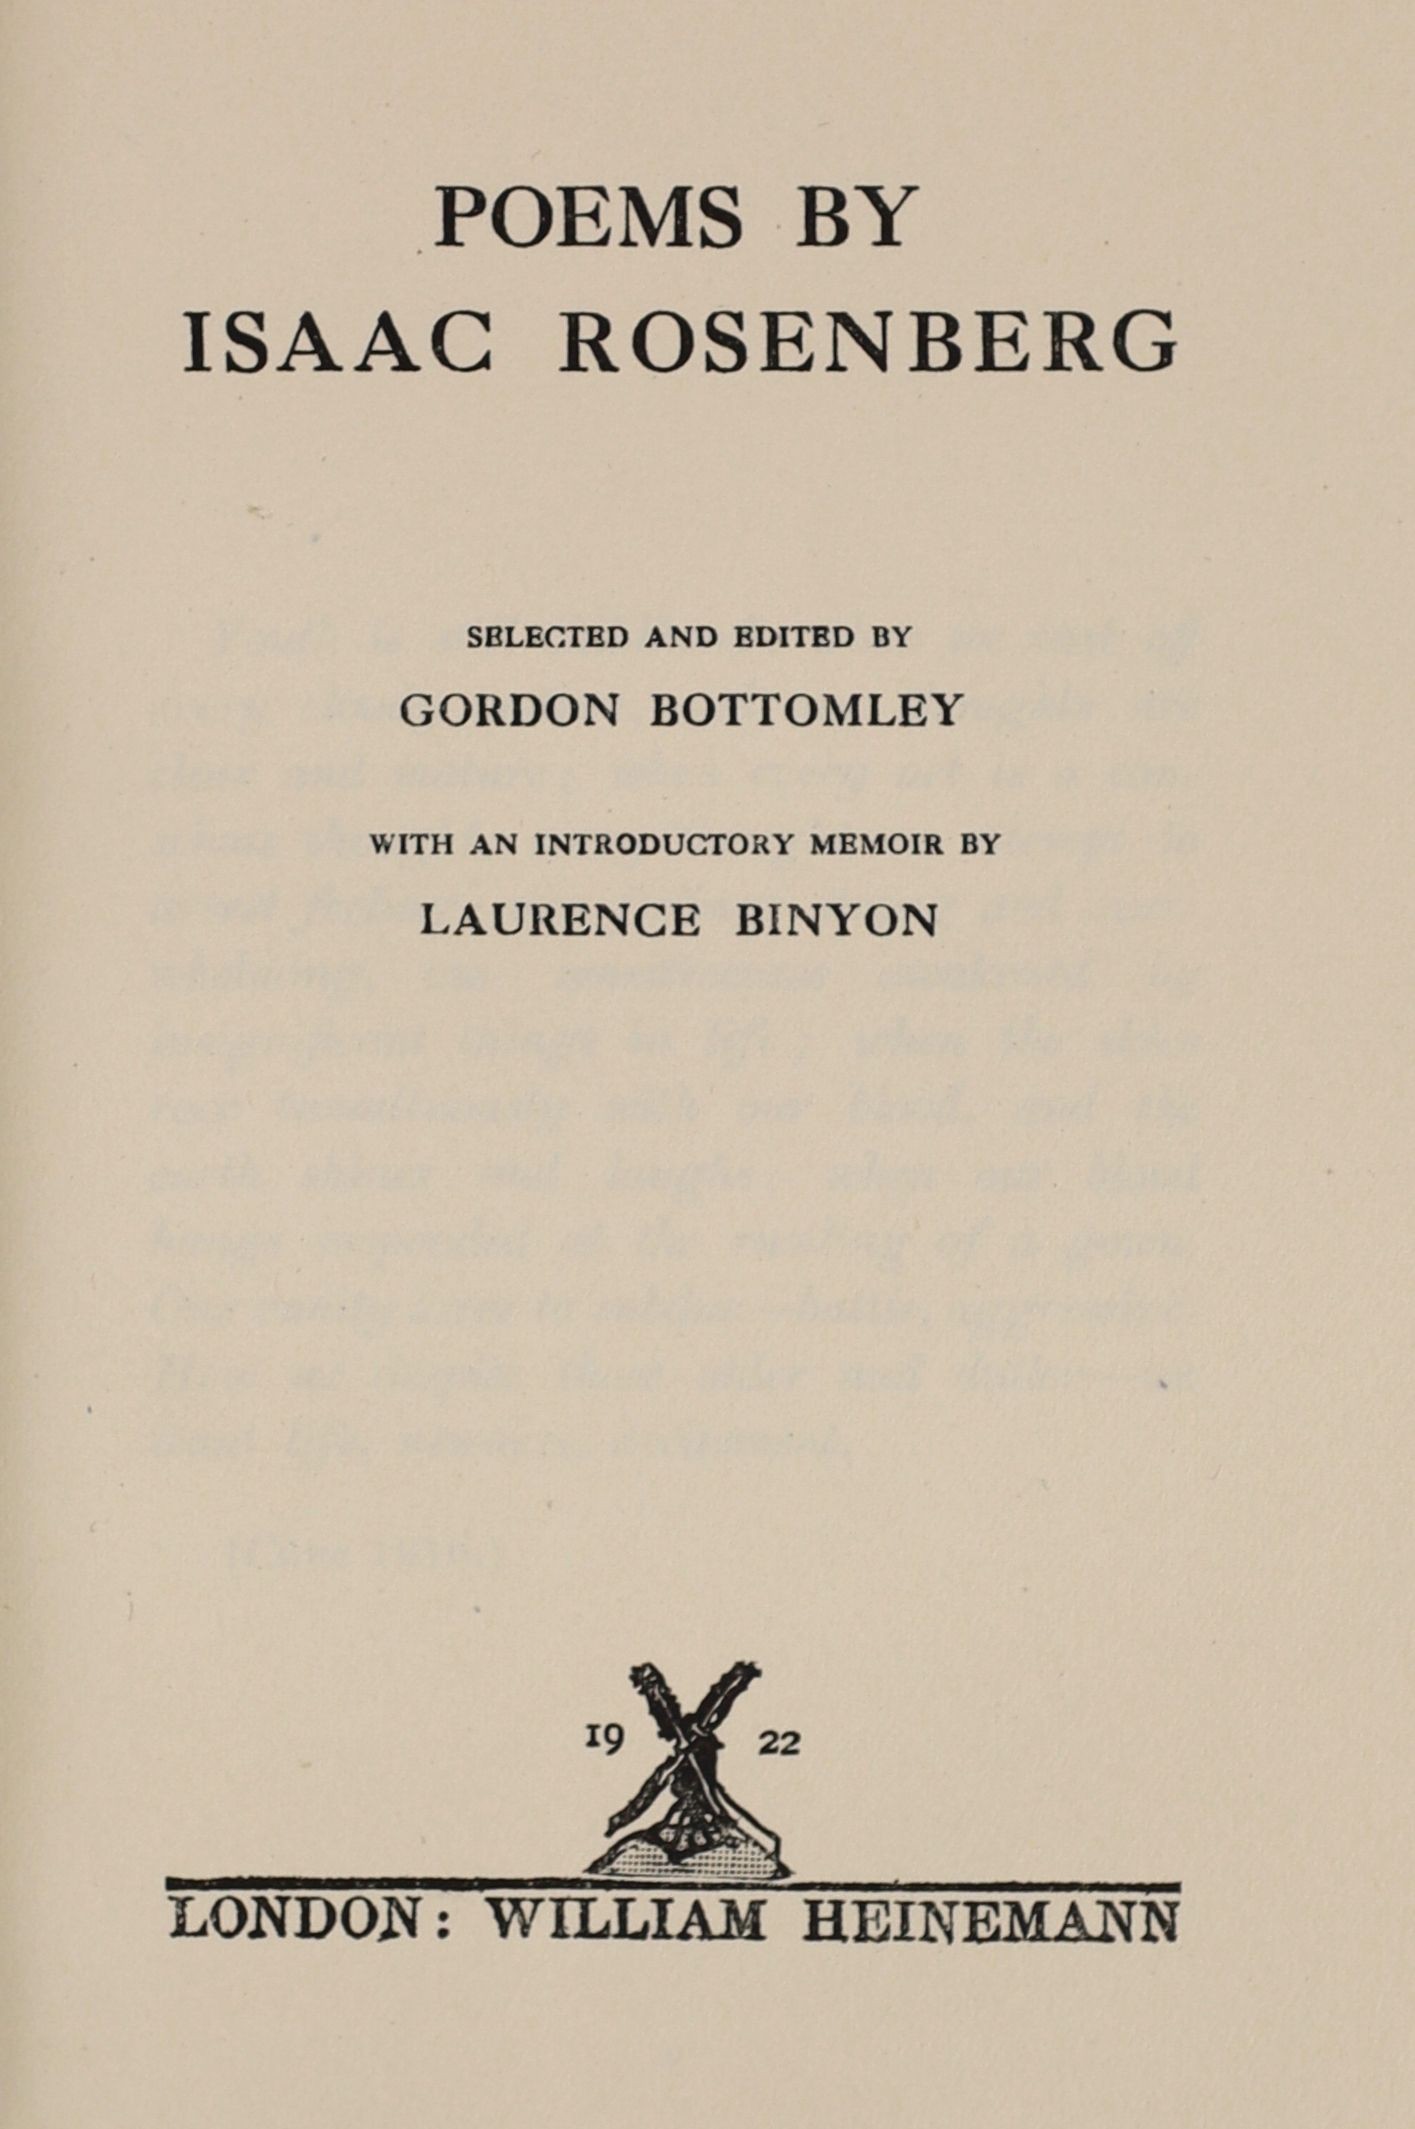 Rosenberg, Isaac [and] Bottomley, Gordon [ed.] - Poems by Isaac Rosenberg. 1st ed. Complete with frontispiece. Publishers cloth with title label on spine and original d/j. 8vo. William Heinemann, London, 1922.